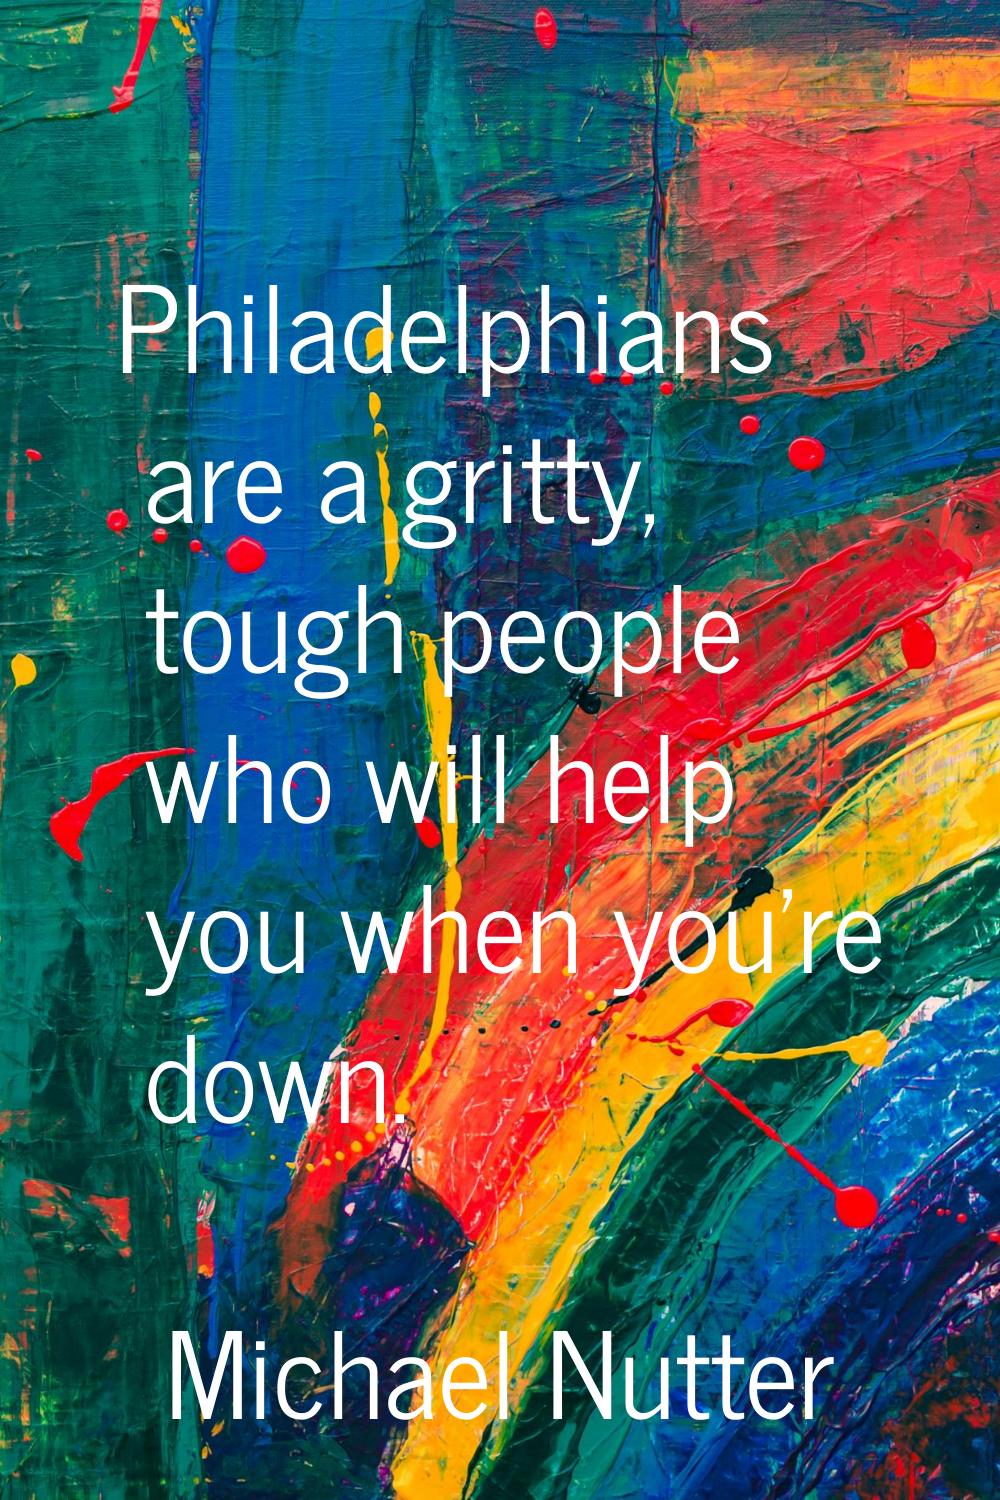 Philadelphians are a gritty, tough people who will help you when you're down.